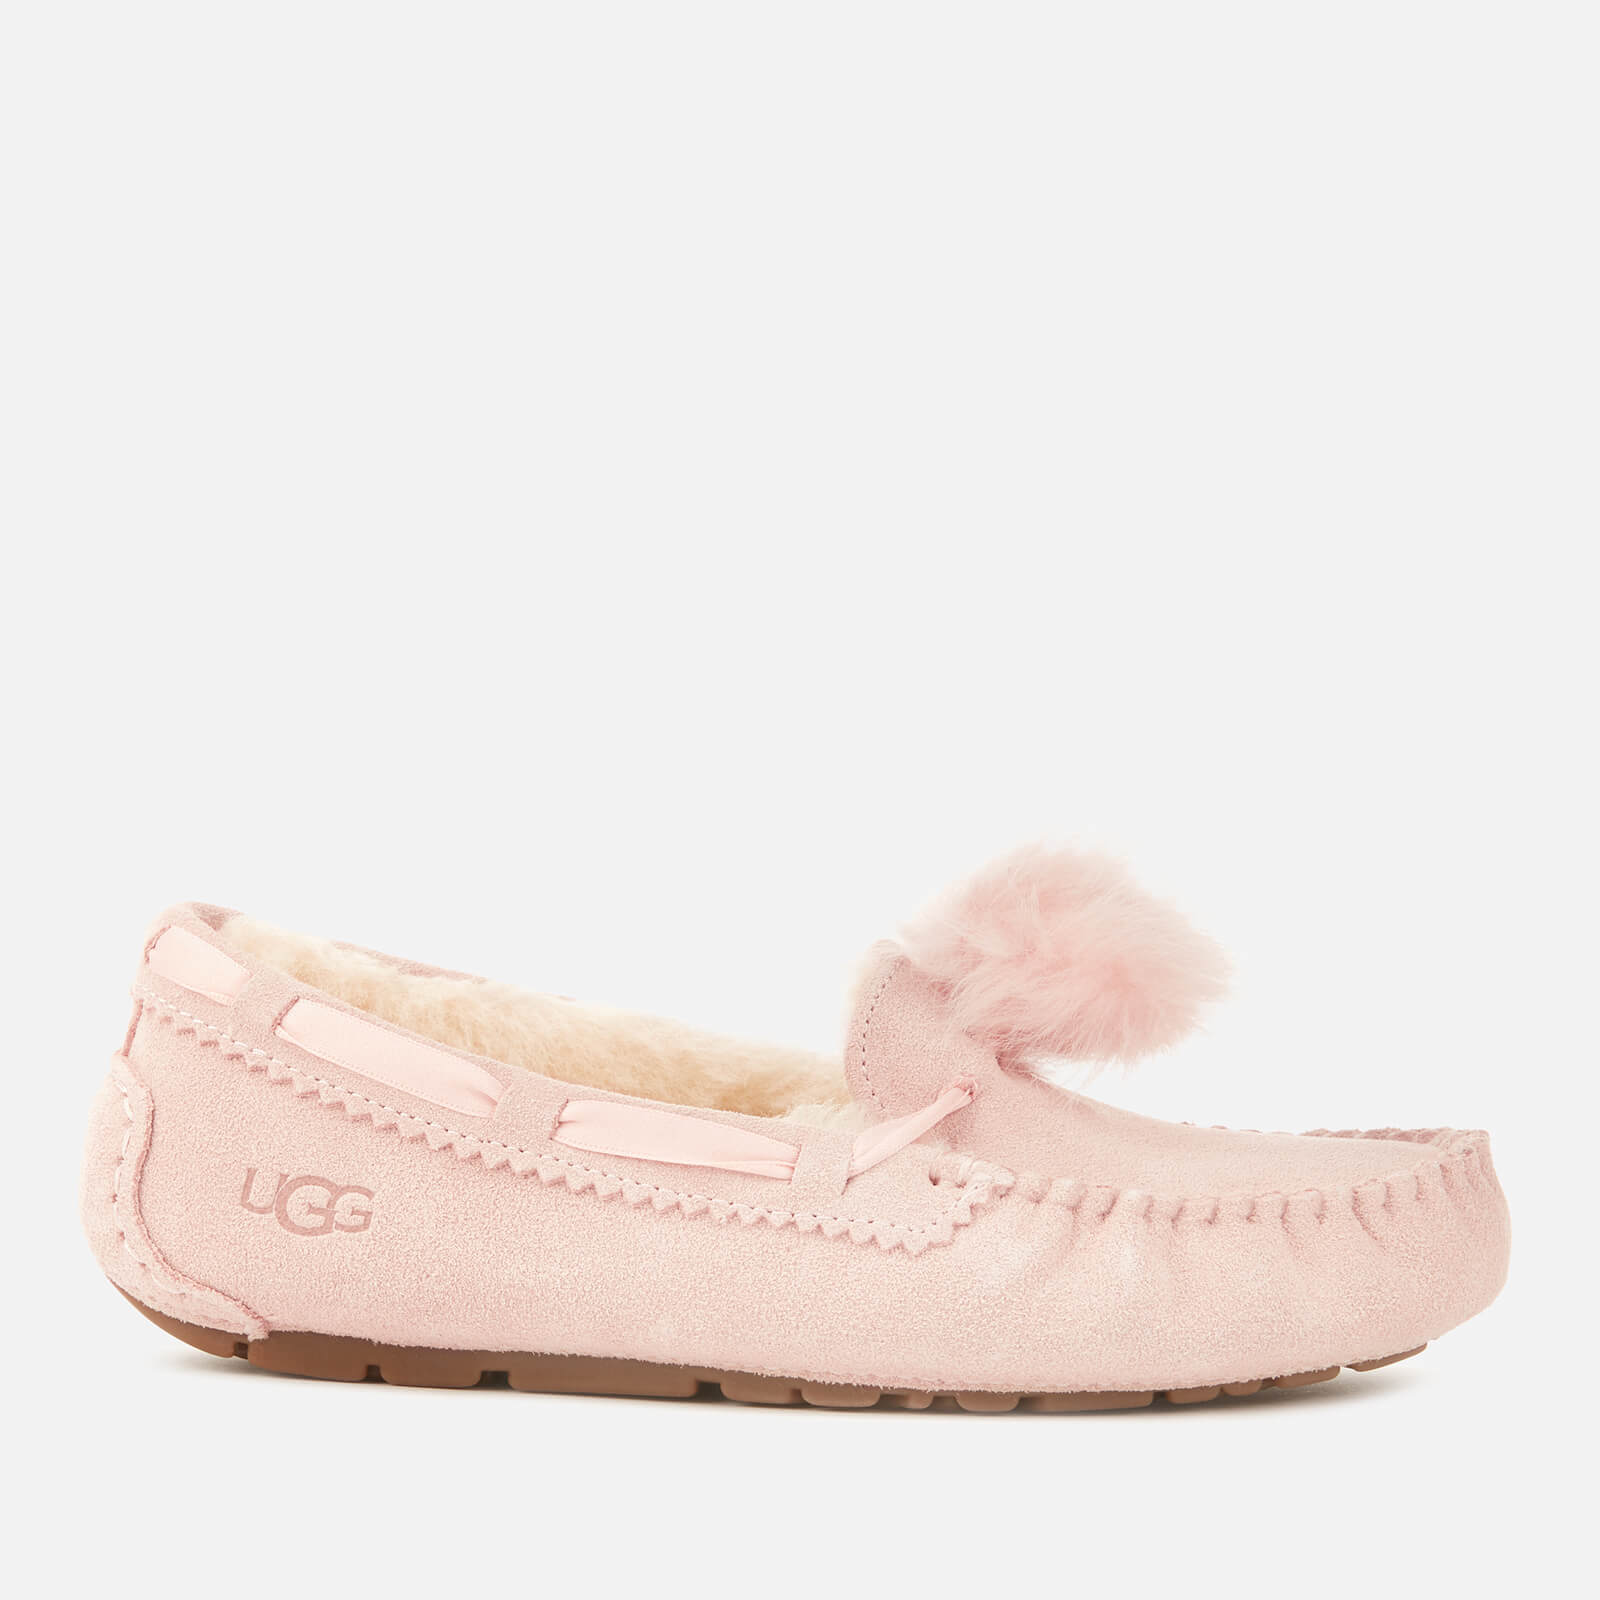 ugg ladies moccasin slippers